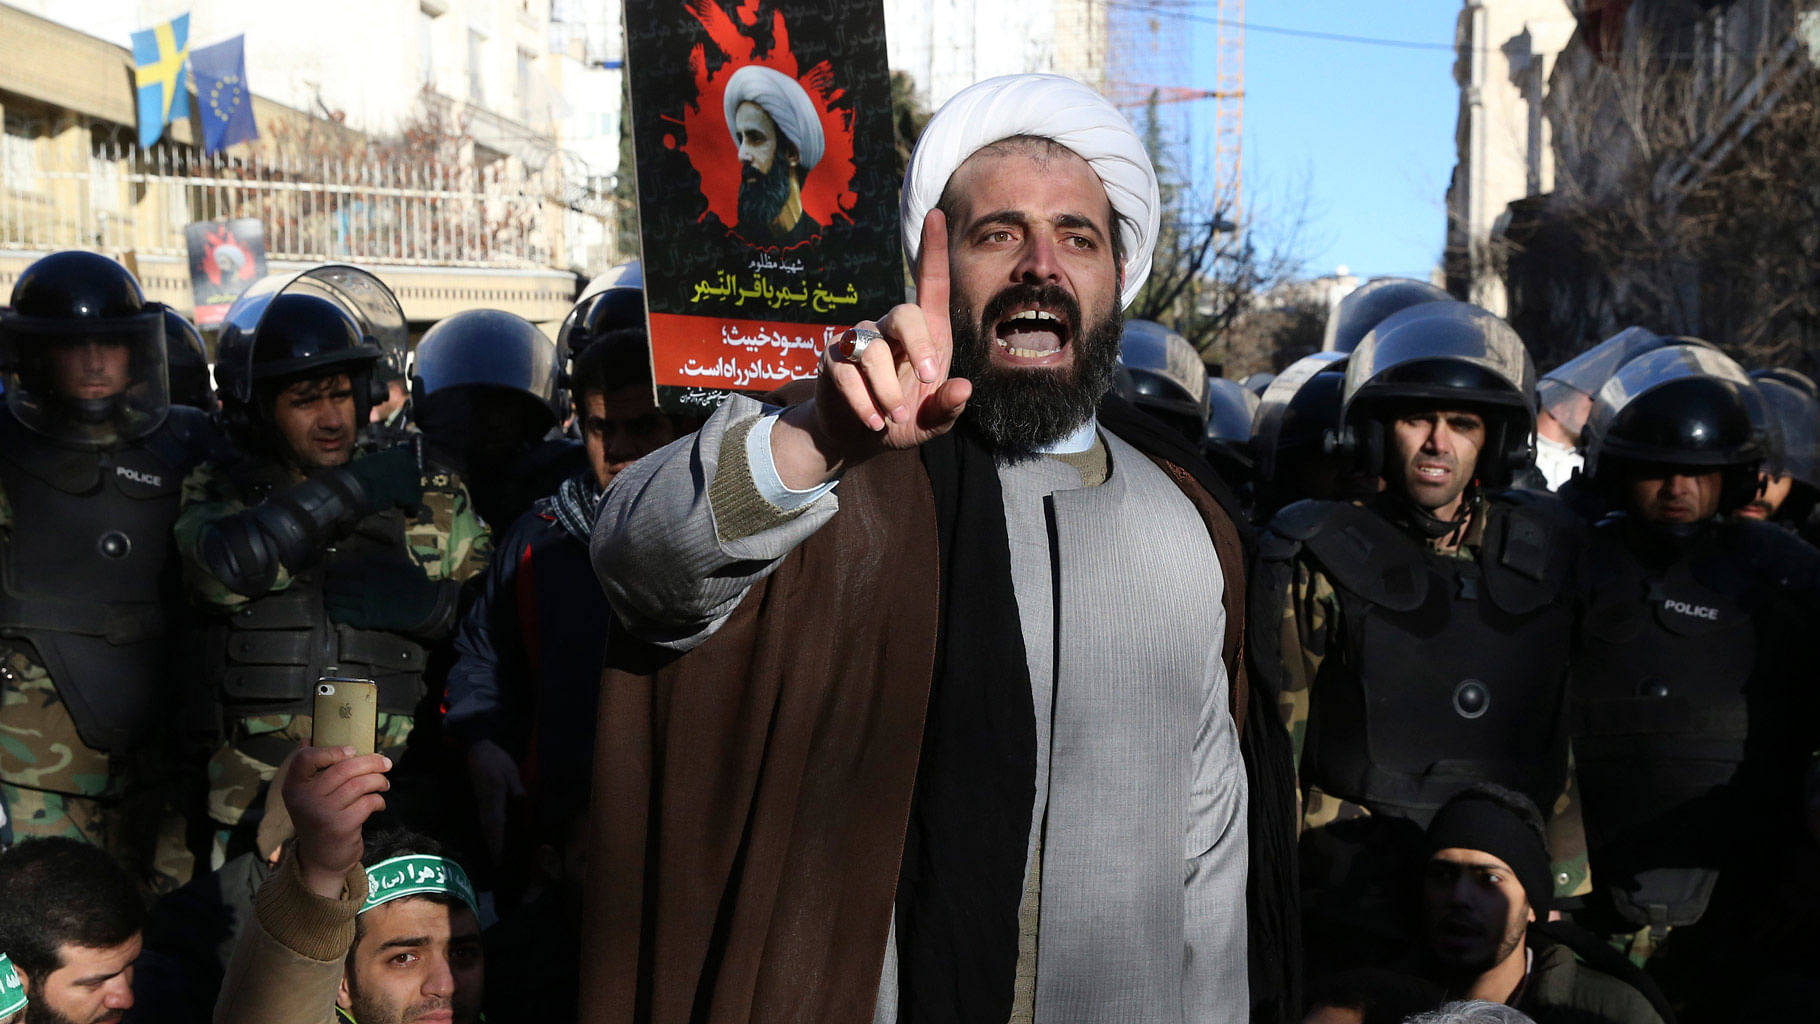 

A Muslim cleric addresses a crowd during a demonstration to protest the execution of al-Nimr, shown in the poster in background, in front of the Saudi embassy in Tehran. (Photo: AP)